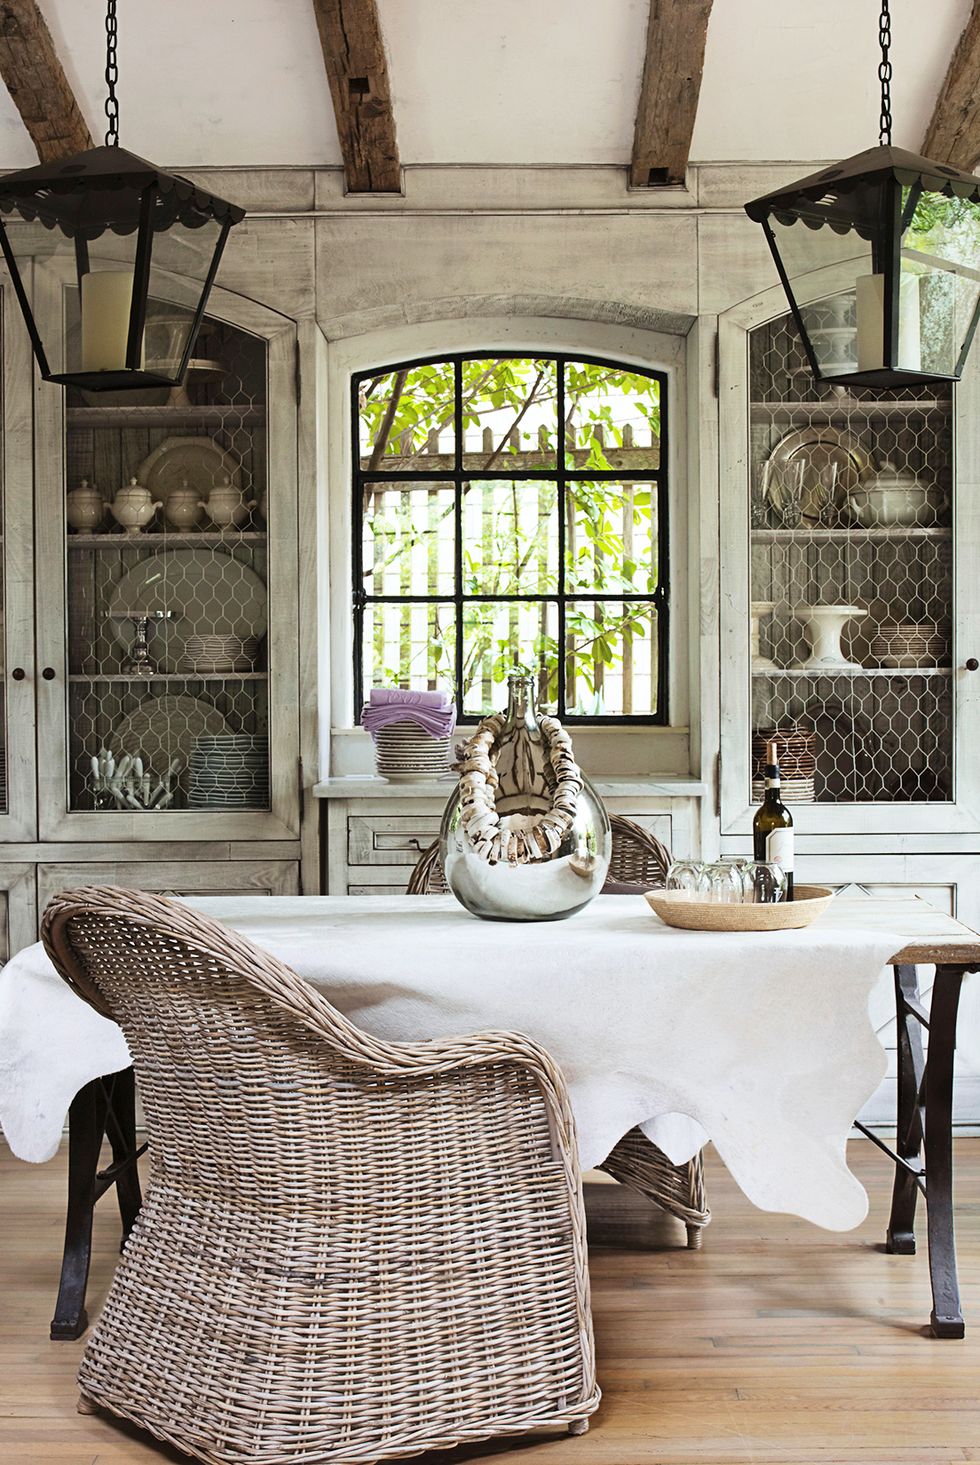 He Loves The Phony French Country Kitchens - Laurel Home